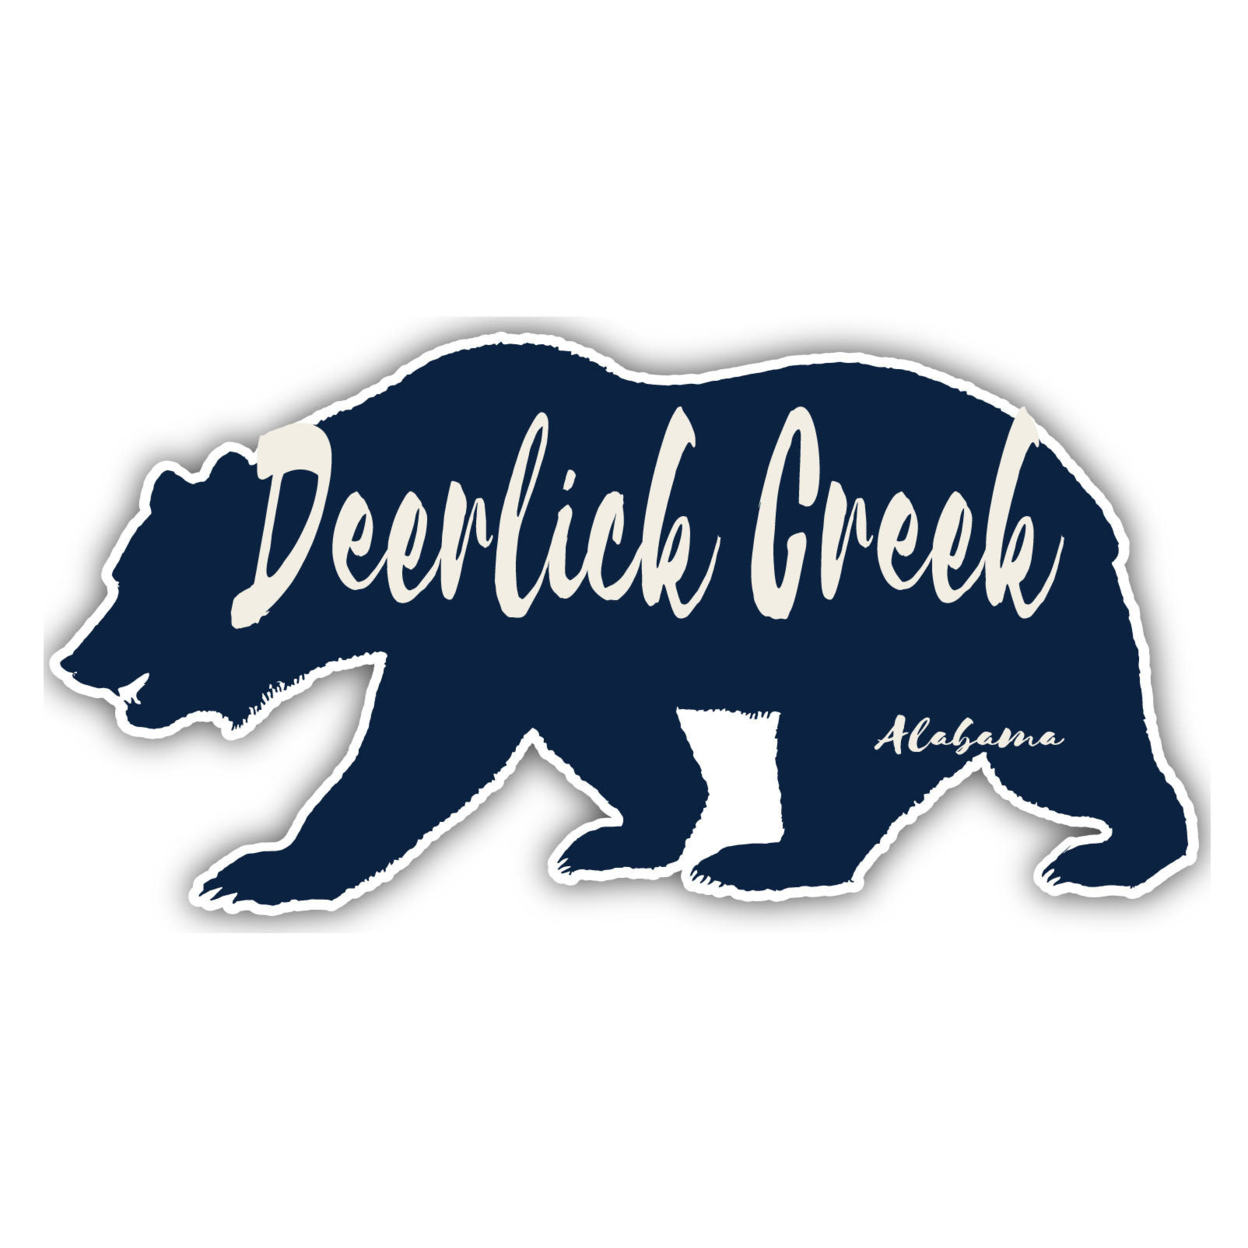 Deerlick Creek Alabama Souvenir Decorative Stickers (Choose Theme And Size) - 4-Pack, 8-Inch, Tent